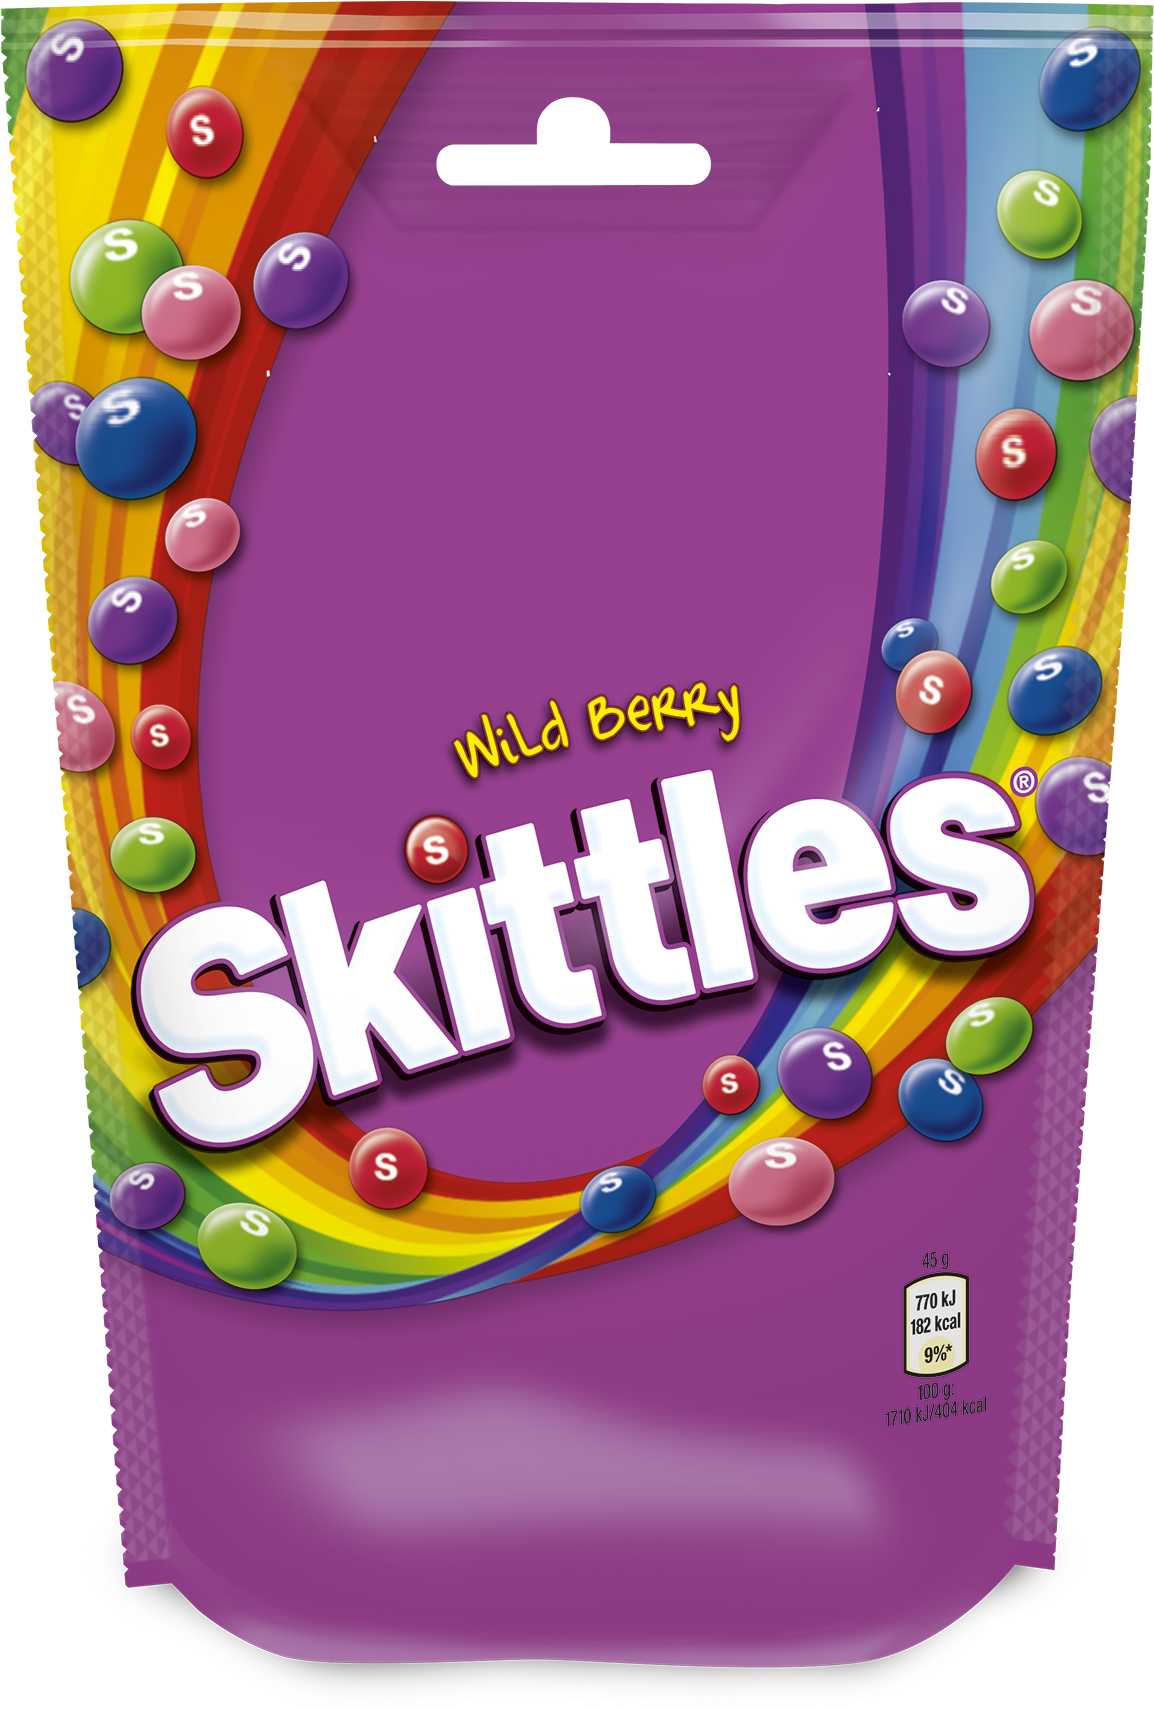 Wild Berry Skittles Package PNG image